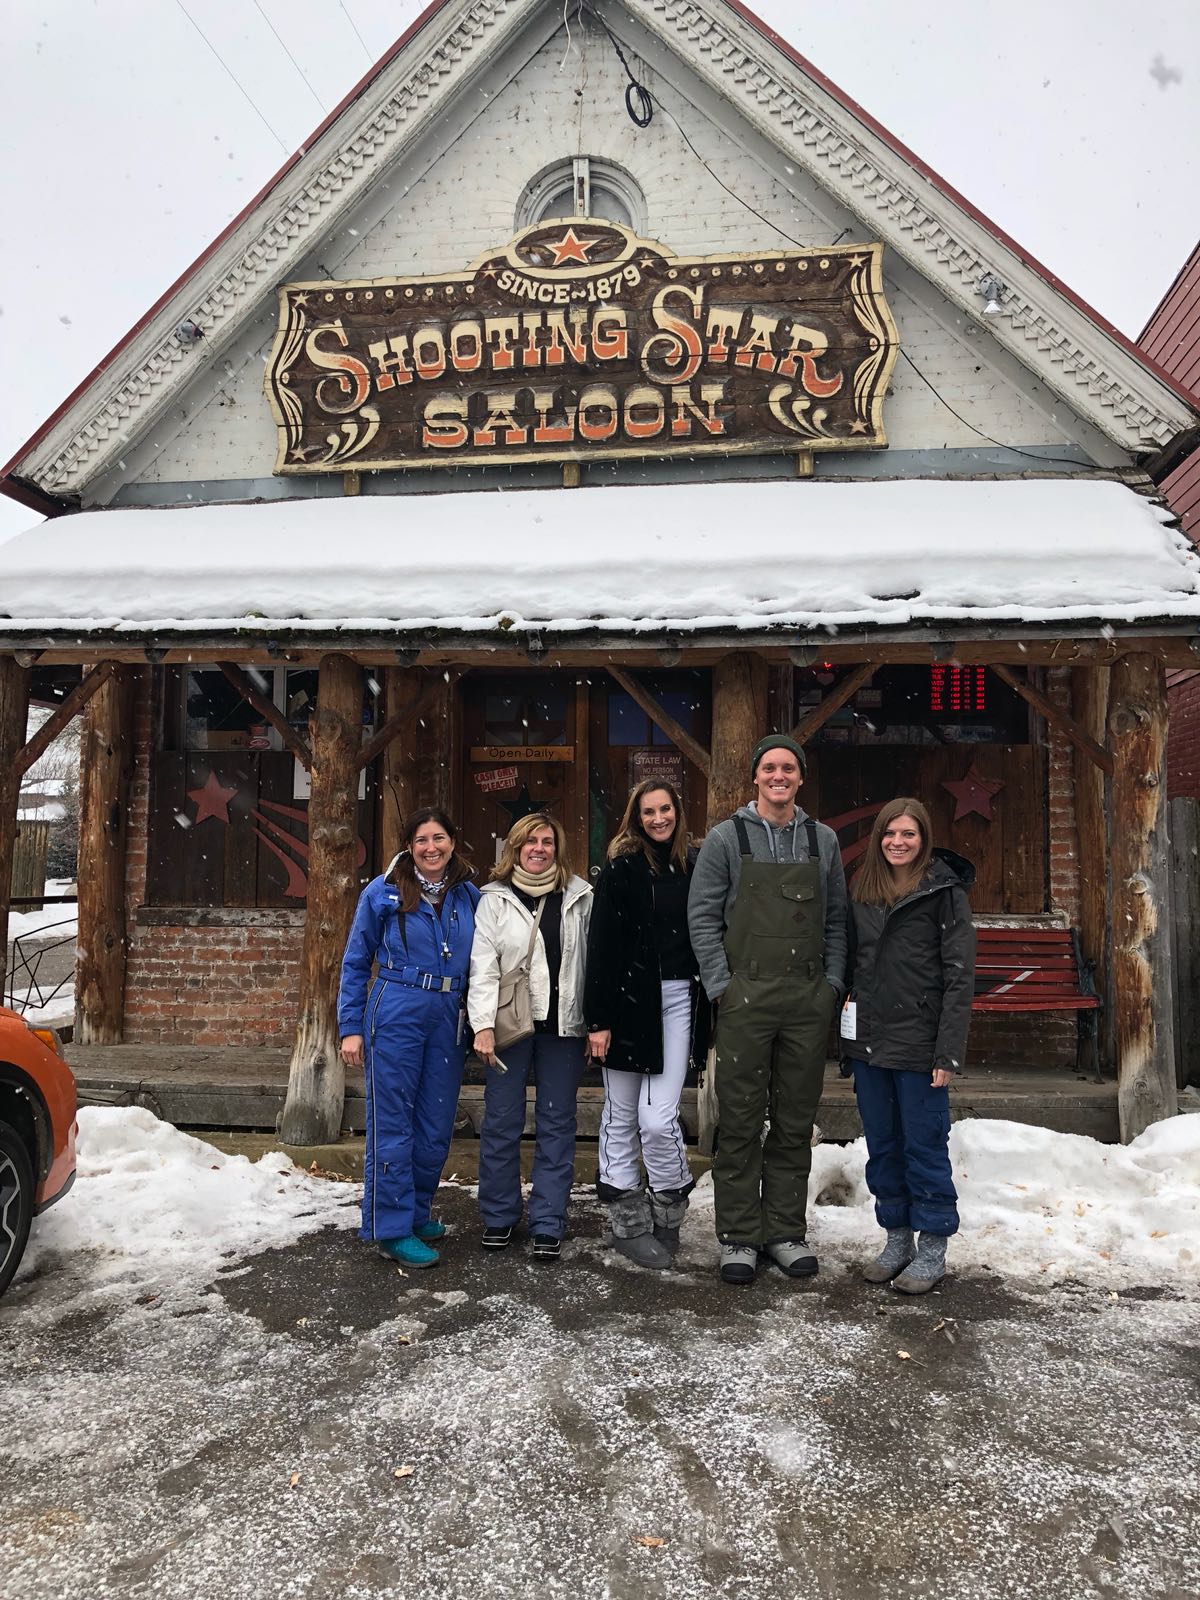 Enjoy a burger and beer at the Shooting Star Saloon is among fun things to do in Ogden after a day on the slopes